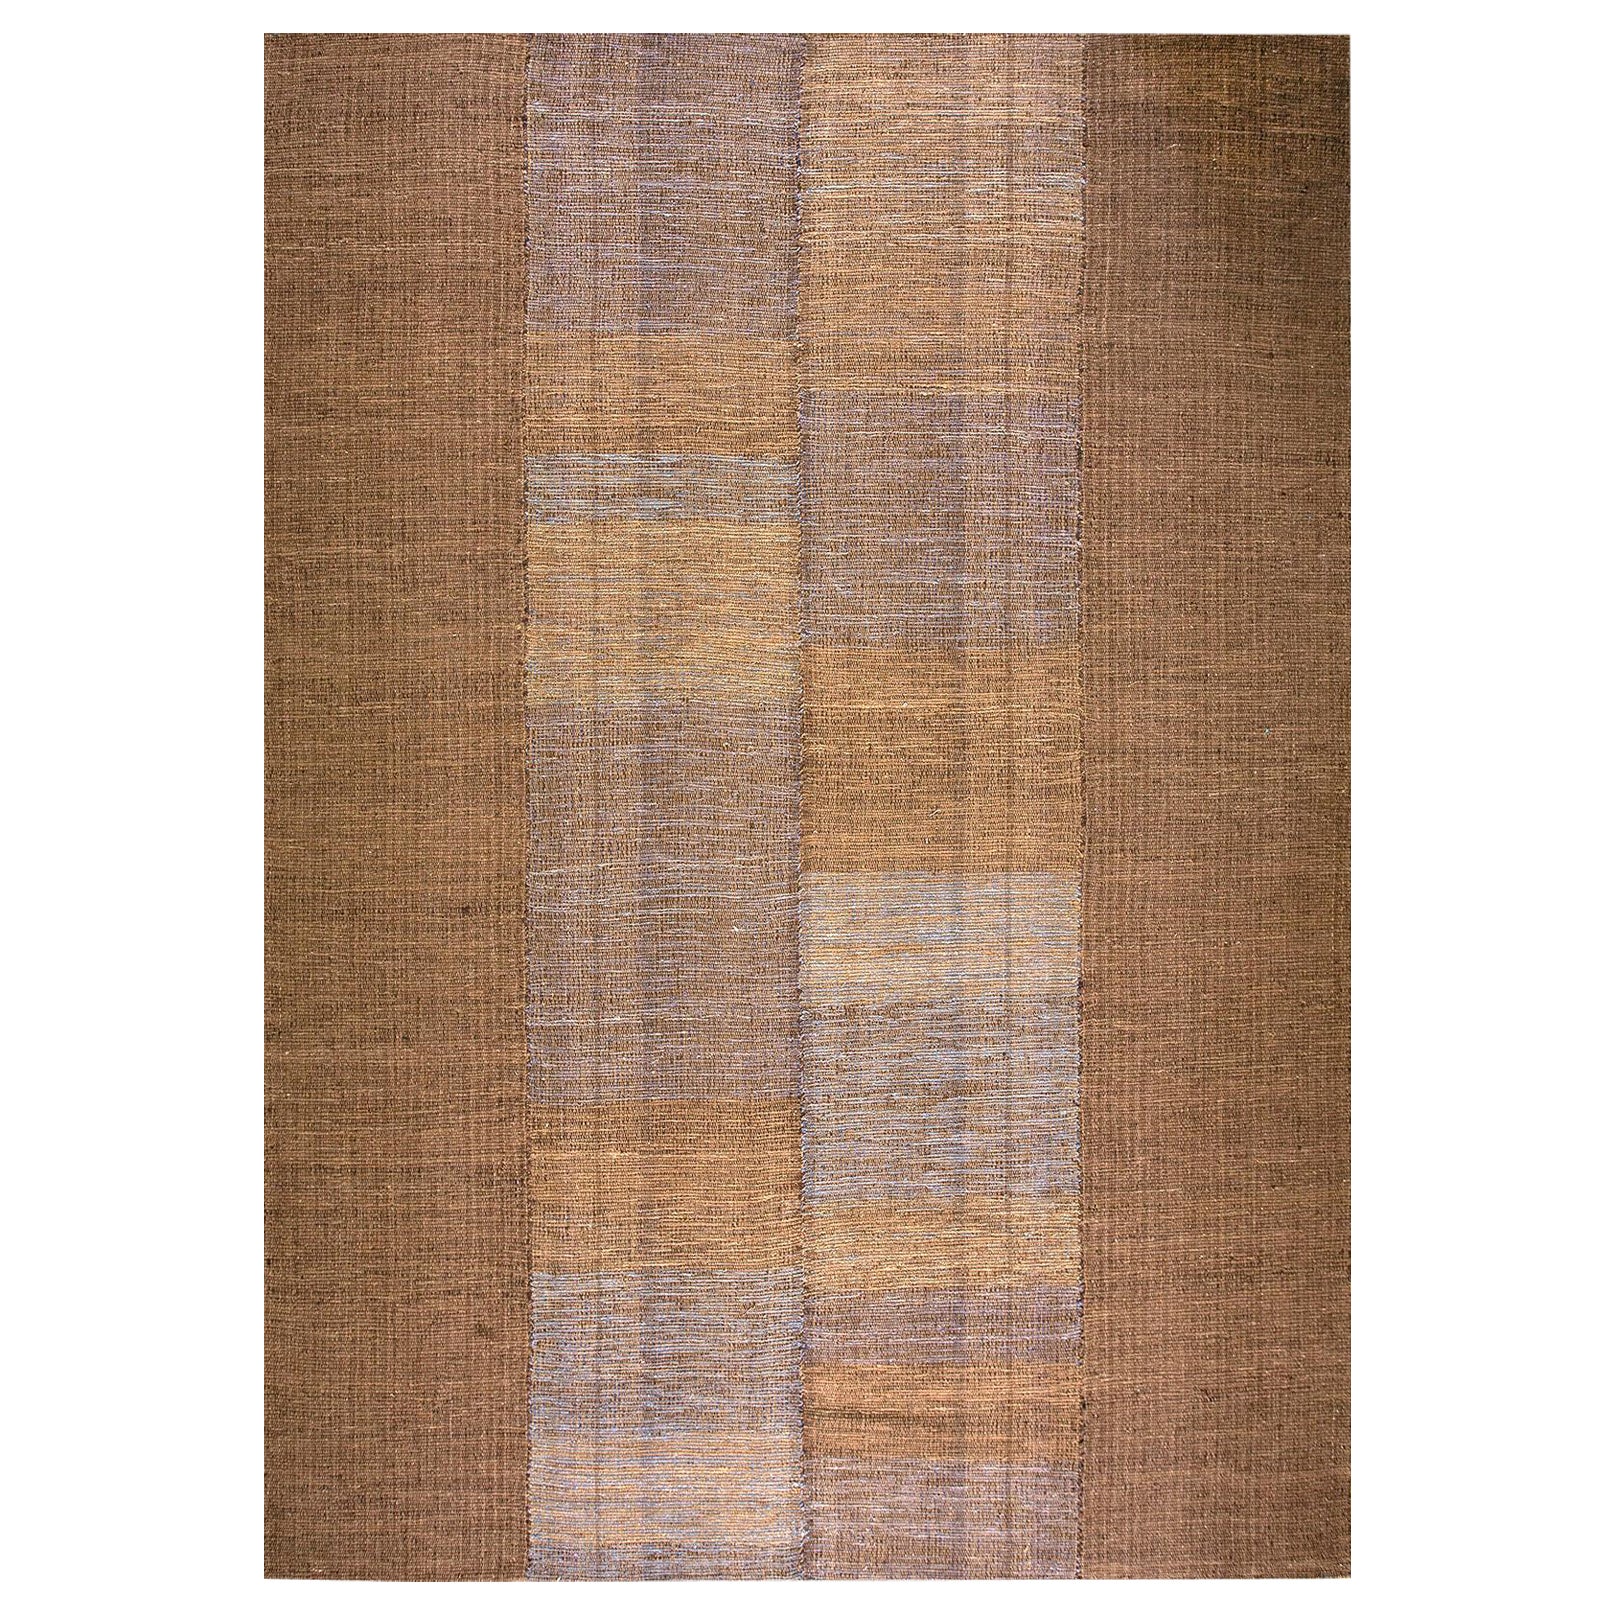 Contemporary Handwoven Wool Shaker Style Flat Weave Carpet (10' 3"X14'-312x427) For Sale